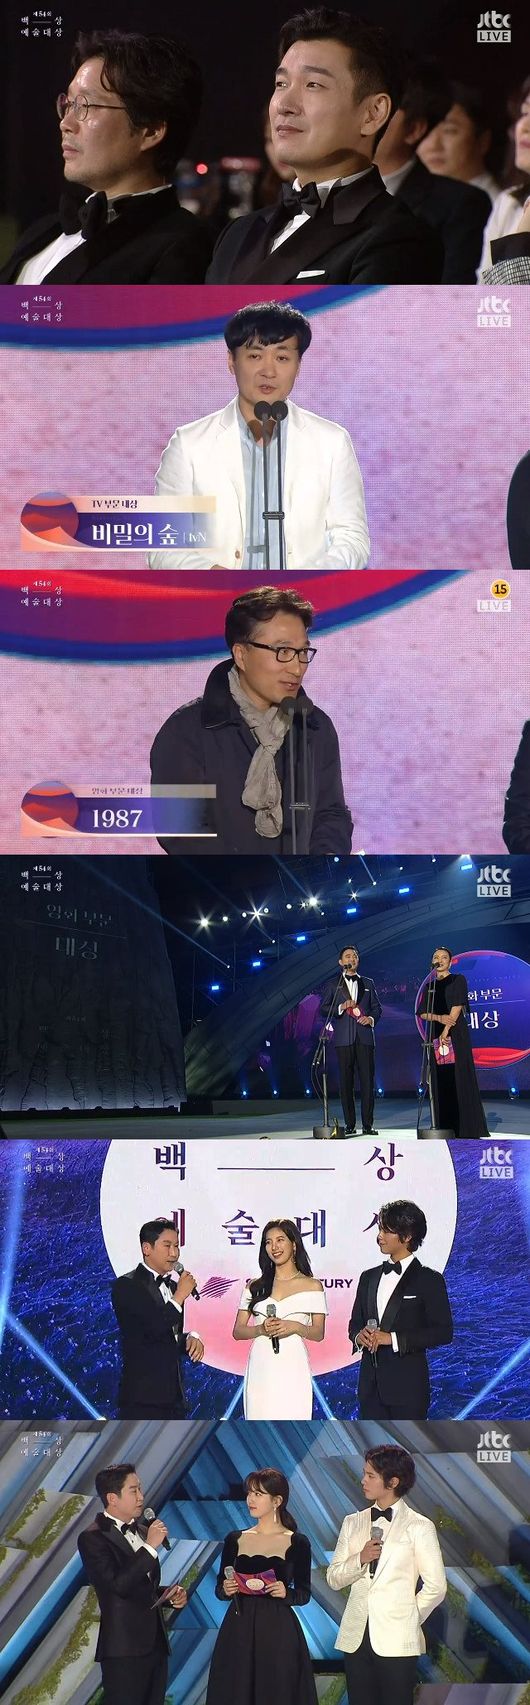 The 2018 White Prize honor went to tvNs Secret Forest and the film 1987.At the 54th Baeksang Arts Awards ceremony held at COEX D Hall in Gangnam-gu, Seoul on March 3, Secret Forest and 1987 won the Grand Prize in TV and movie, respectively. Prior to this, the film award was awarded to the movie Namhansanseong, drama tvN Mother, entertainment JTBC Hyorine Minbak, and culture KBS Special In addition, the best acting award in the TV category was given by Cho Seung-woo of Secret Forest and Kim Nam-joo of JTBC Misty. Each of them said, I wonder if you have seen the Secret Forest .I would like to go to Season 5 personally and I would like to ask for a lot of support so that the secret forest that I personally enjoyed is going to the season system.  I was happy to live in Goh Hye Ran for the past six months.I was really lucky to meet Goh Hye-ran, who had nothing as an actor.Kim Nam-ju will continue to reach viewers with fair and transparent acting. The best actor in the film category was Kim Yoon-seok of the movie 1987 and Na Moon-hee of the movie I Can Speak. In fact, I thought I needed two words.I want to give all the glory to director Jang Jun-hwan who informed me of this, I started to receive the prize from 77 years old and got it from 78 years old.I want to share this prize with comfort women grandmothers and all grandmothers in the world. The popular awards were received by Bae Suzy, who has been active as a white MC for the third consecutive year, and Jung Hae-in, who is popular with JTBCs Bob-savvy Sister.Bae Suzy said, It is an honor to have been MC for the third consecutive year, and I received such a pleasant award.I would like to thank the fans who voted and promise to come to a good work soon. Jung Hae-in said, I am so nervous. I will do my best to postpone it with all my heart.And I will be a person who can appreciate the small happiness. Finally, I will walk silently and calmly on the grateful path I have been given. 